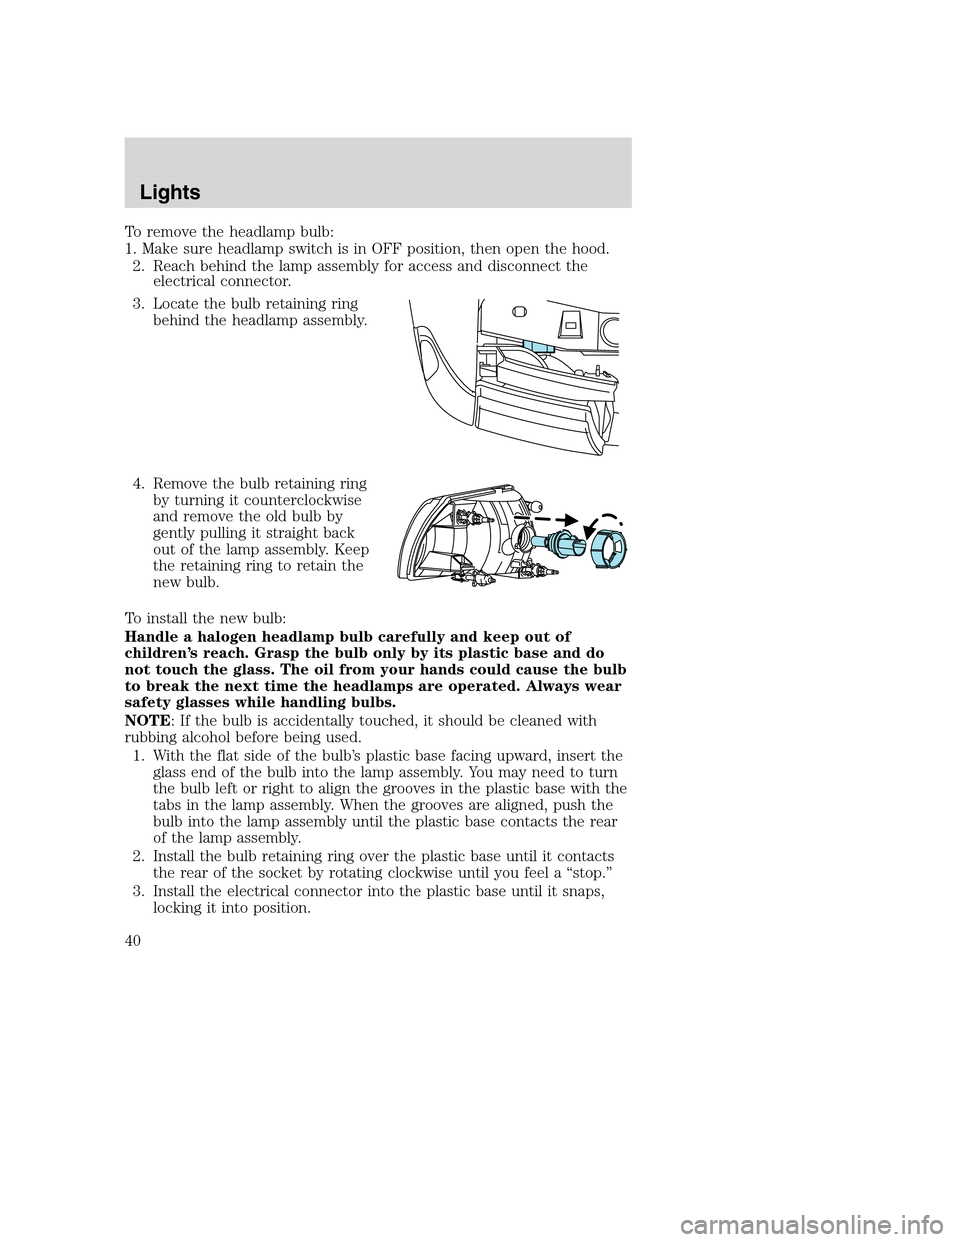 MAZDA MODEL B-SERIES 2005   (in English) Owners Guide To remove the headlamp bulb:
1. Make sure headlamp switch is in OFF position, then open the hood.
2. Reach behind the lamp assembly for access and disconnect the
electrical connector.
3. Locate the bu